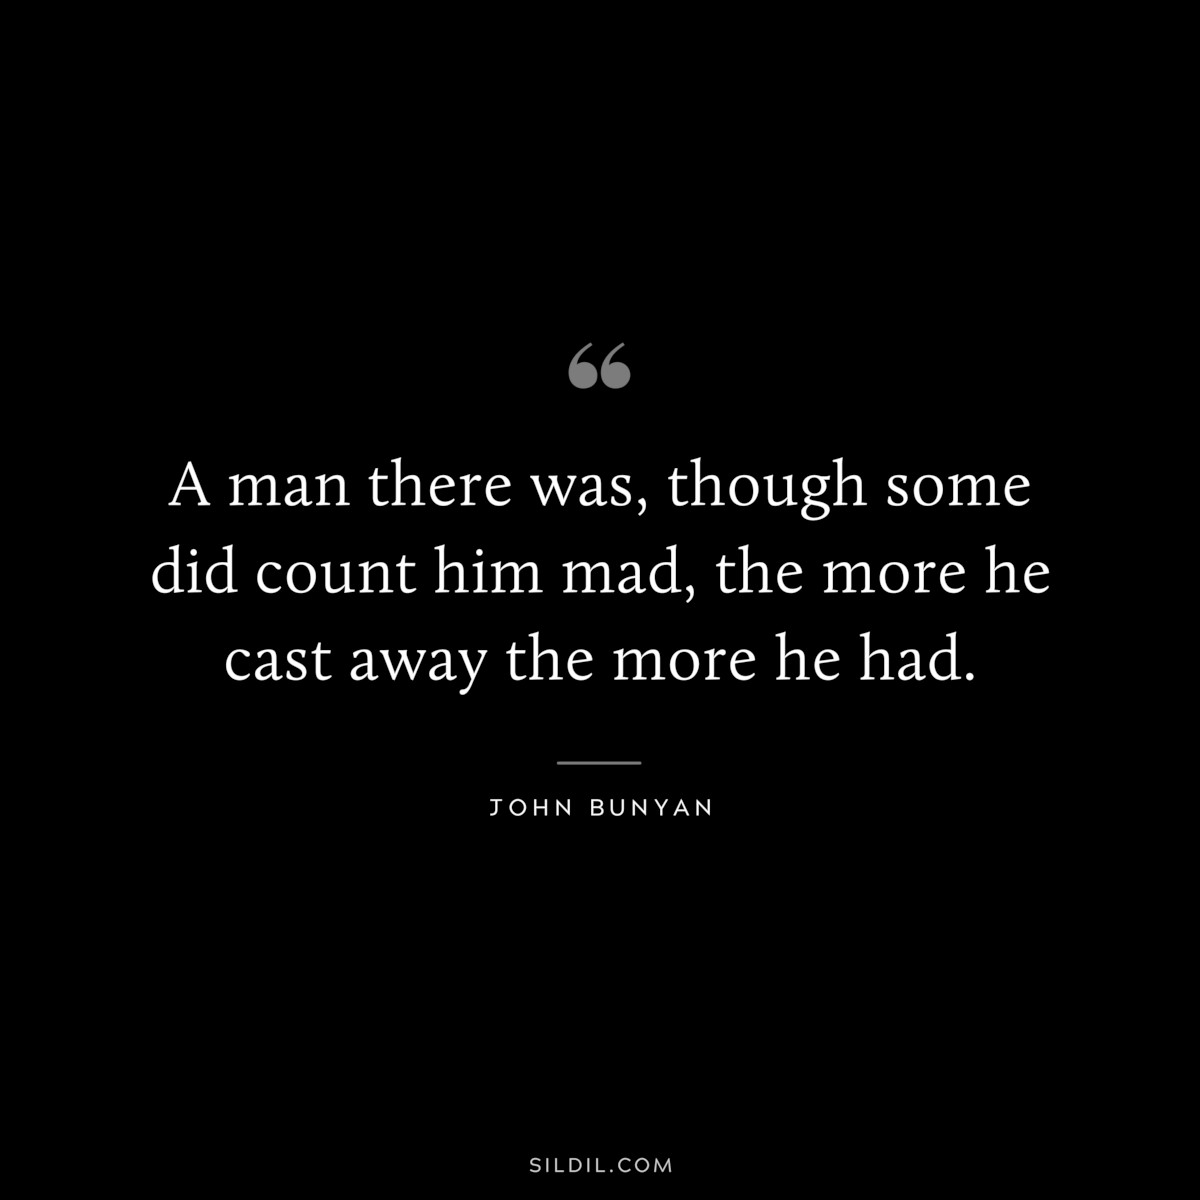 A man there was, though some did count him mad, the more he cast away the more he had. ― John Bunyan